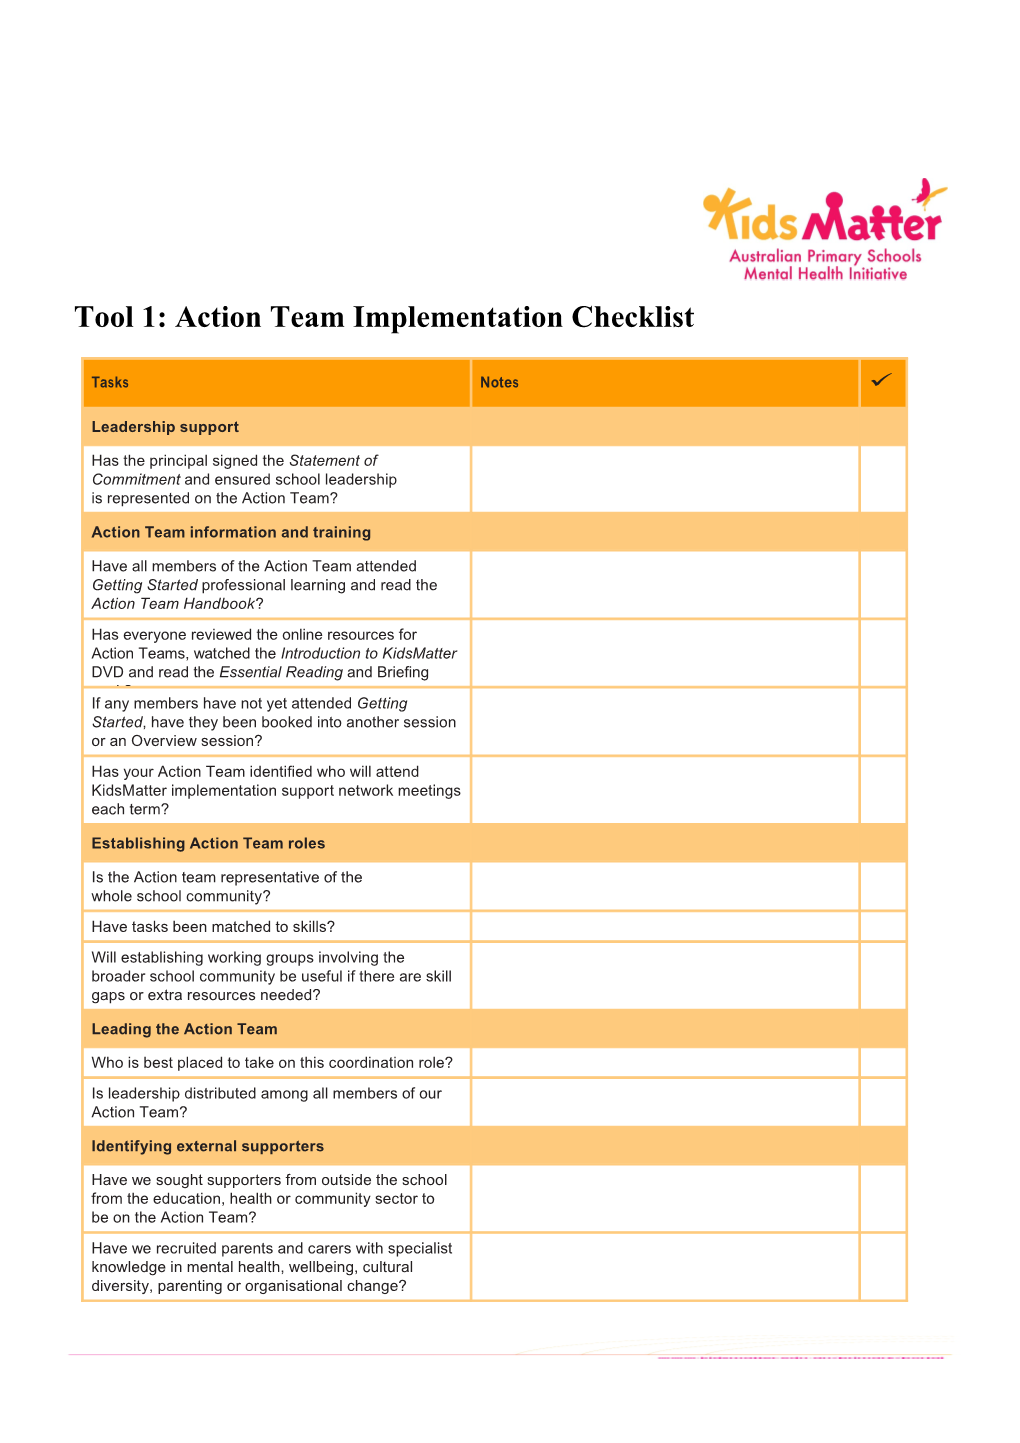 Tool 1: Action Team Implementation Checklist